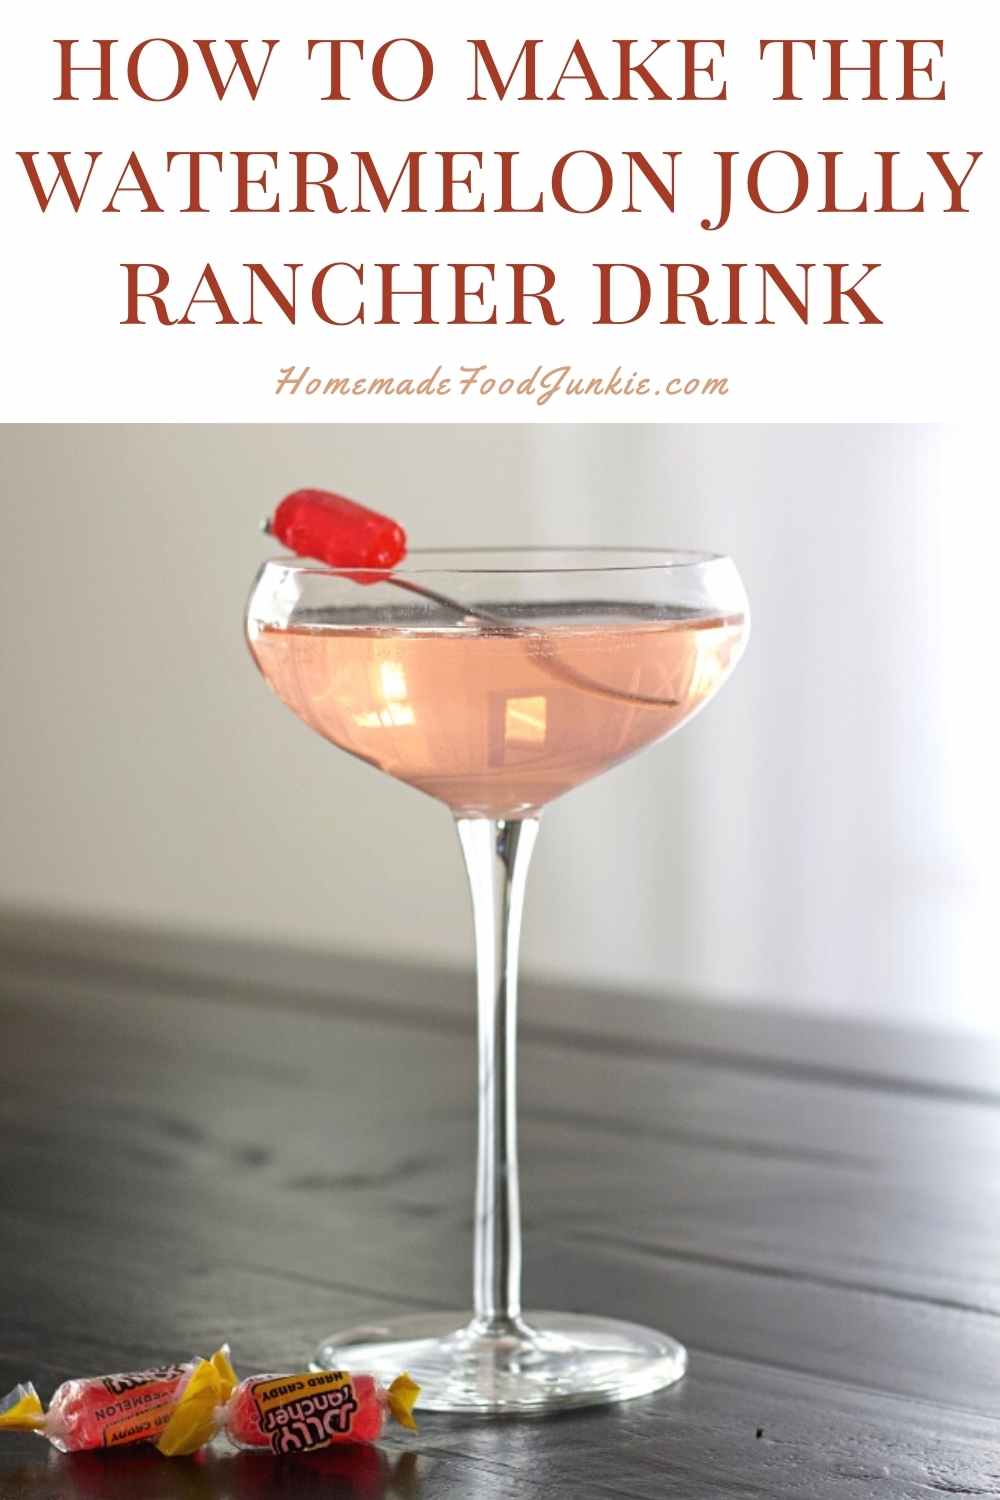 How To Make The Watermelon Jolly Rancher Drink-Pin Image